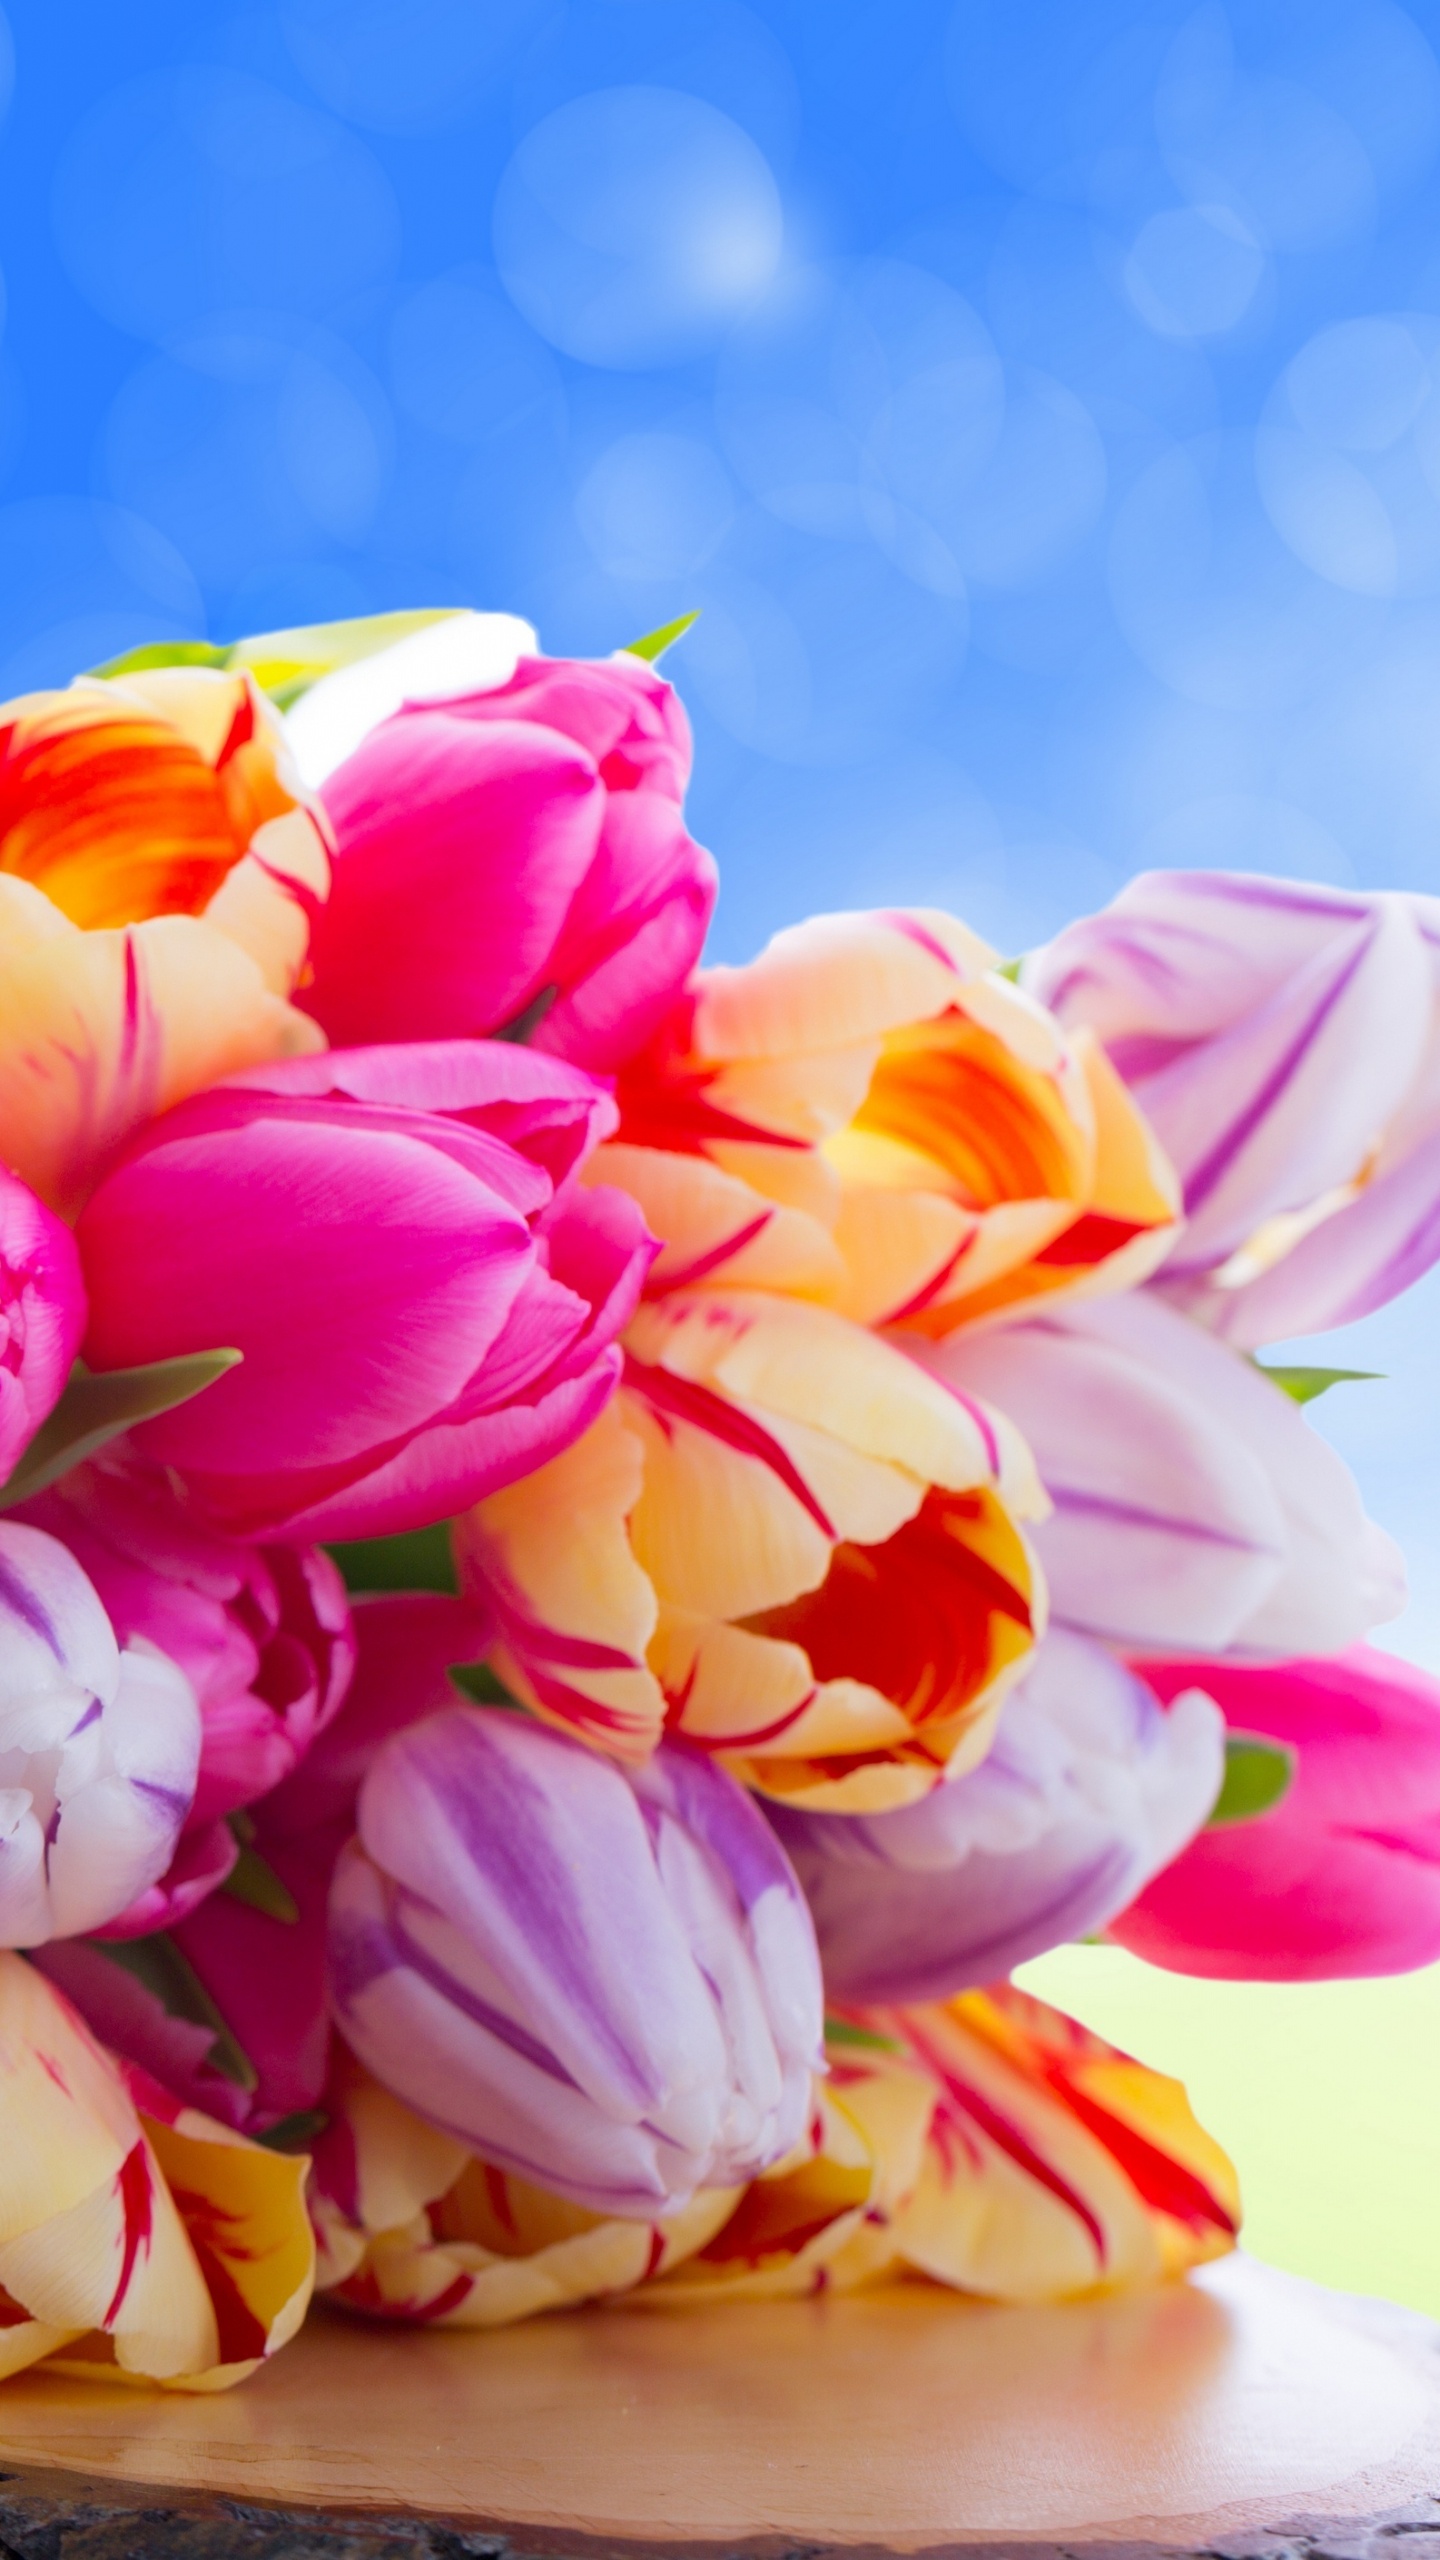 Pink and Yellow Tulips Bouquet. Wallpaper in 1440x2560 Resolution